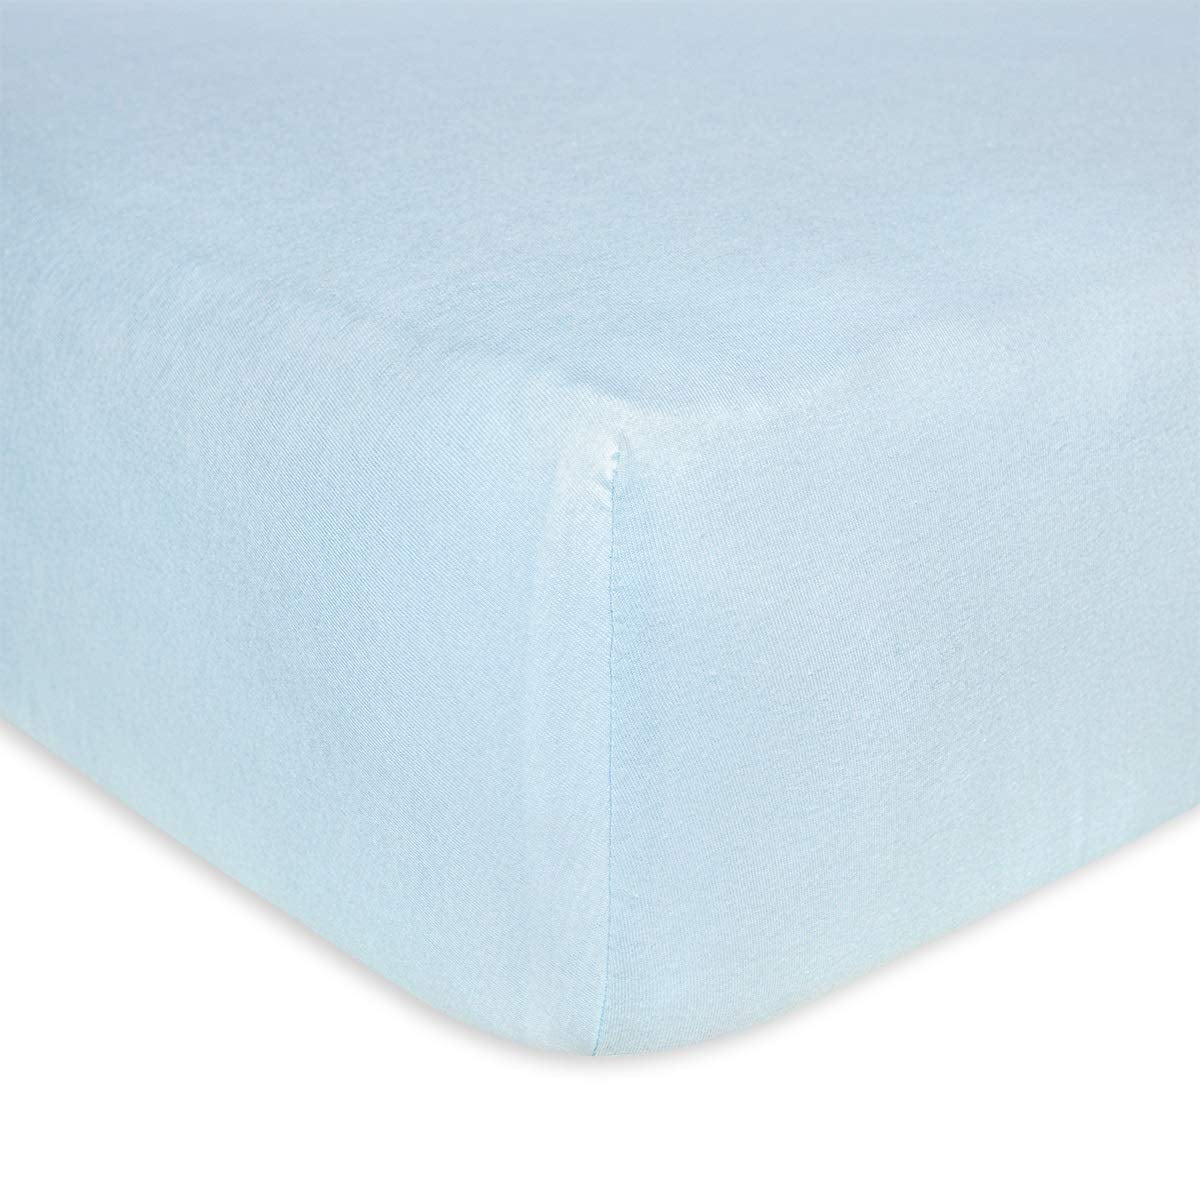 Burt's Bees Baby - Fitted Crib Sheet, Solid Color, 100% Organic Cotton Crib Sheet for Standard Crib and Toddler Mattresses (Sky Blue) - (For 8 piece(s))